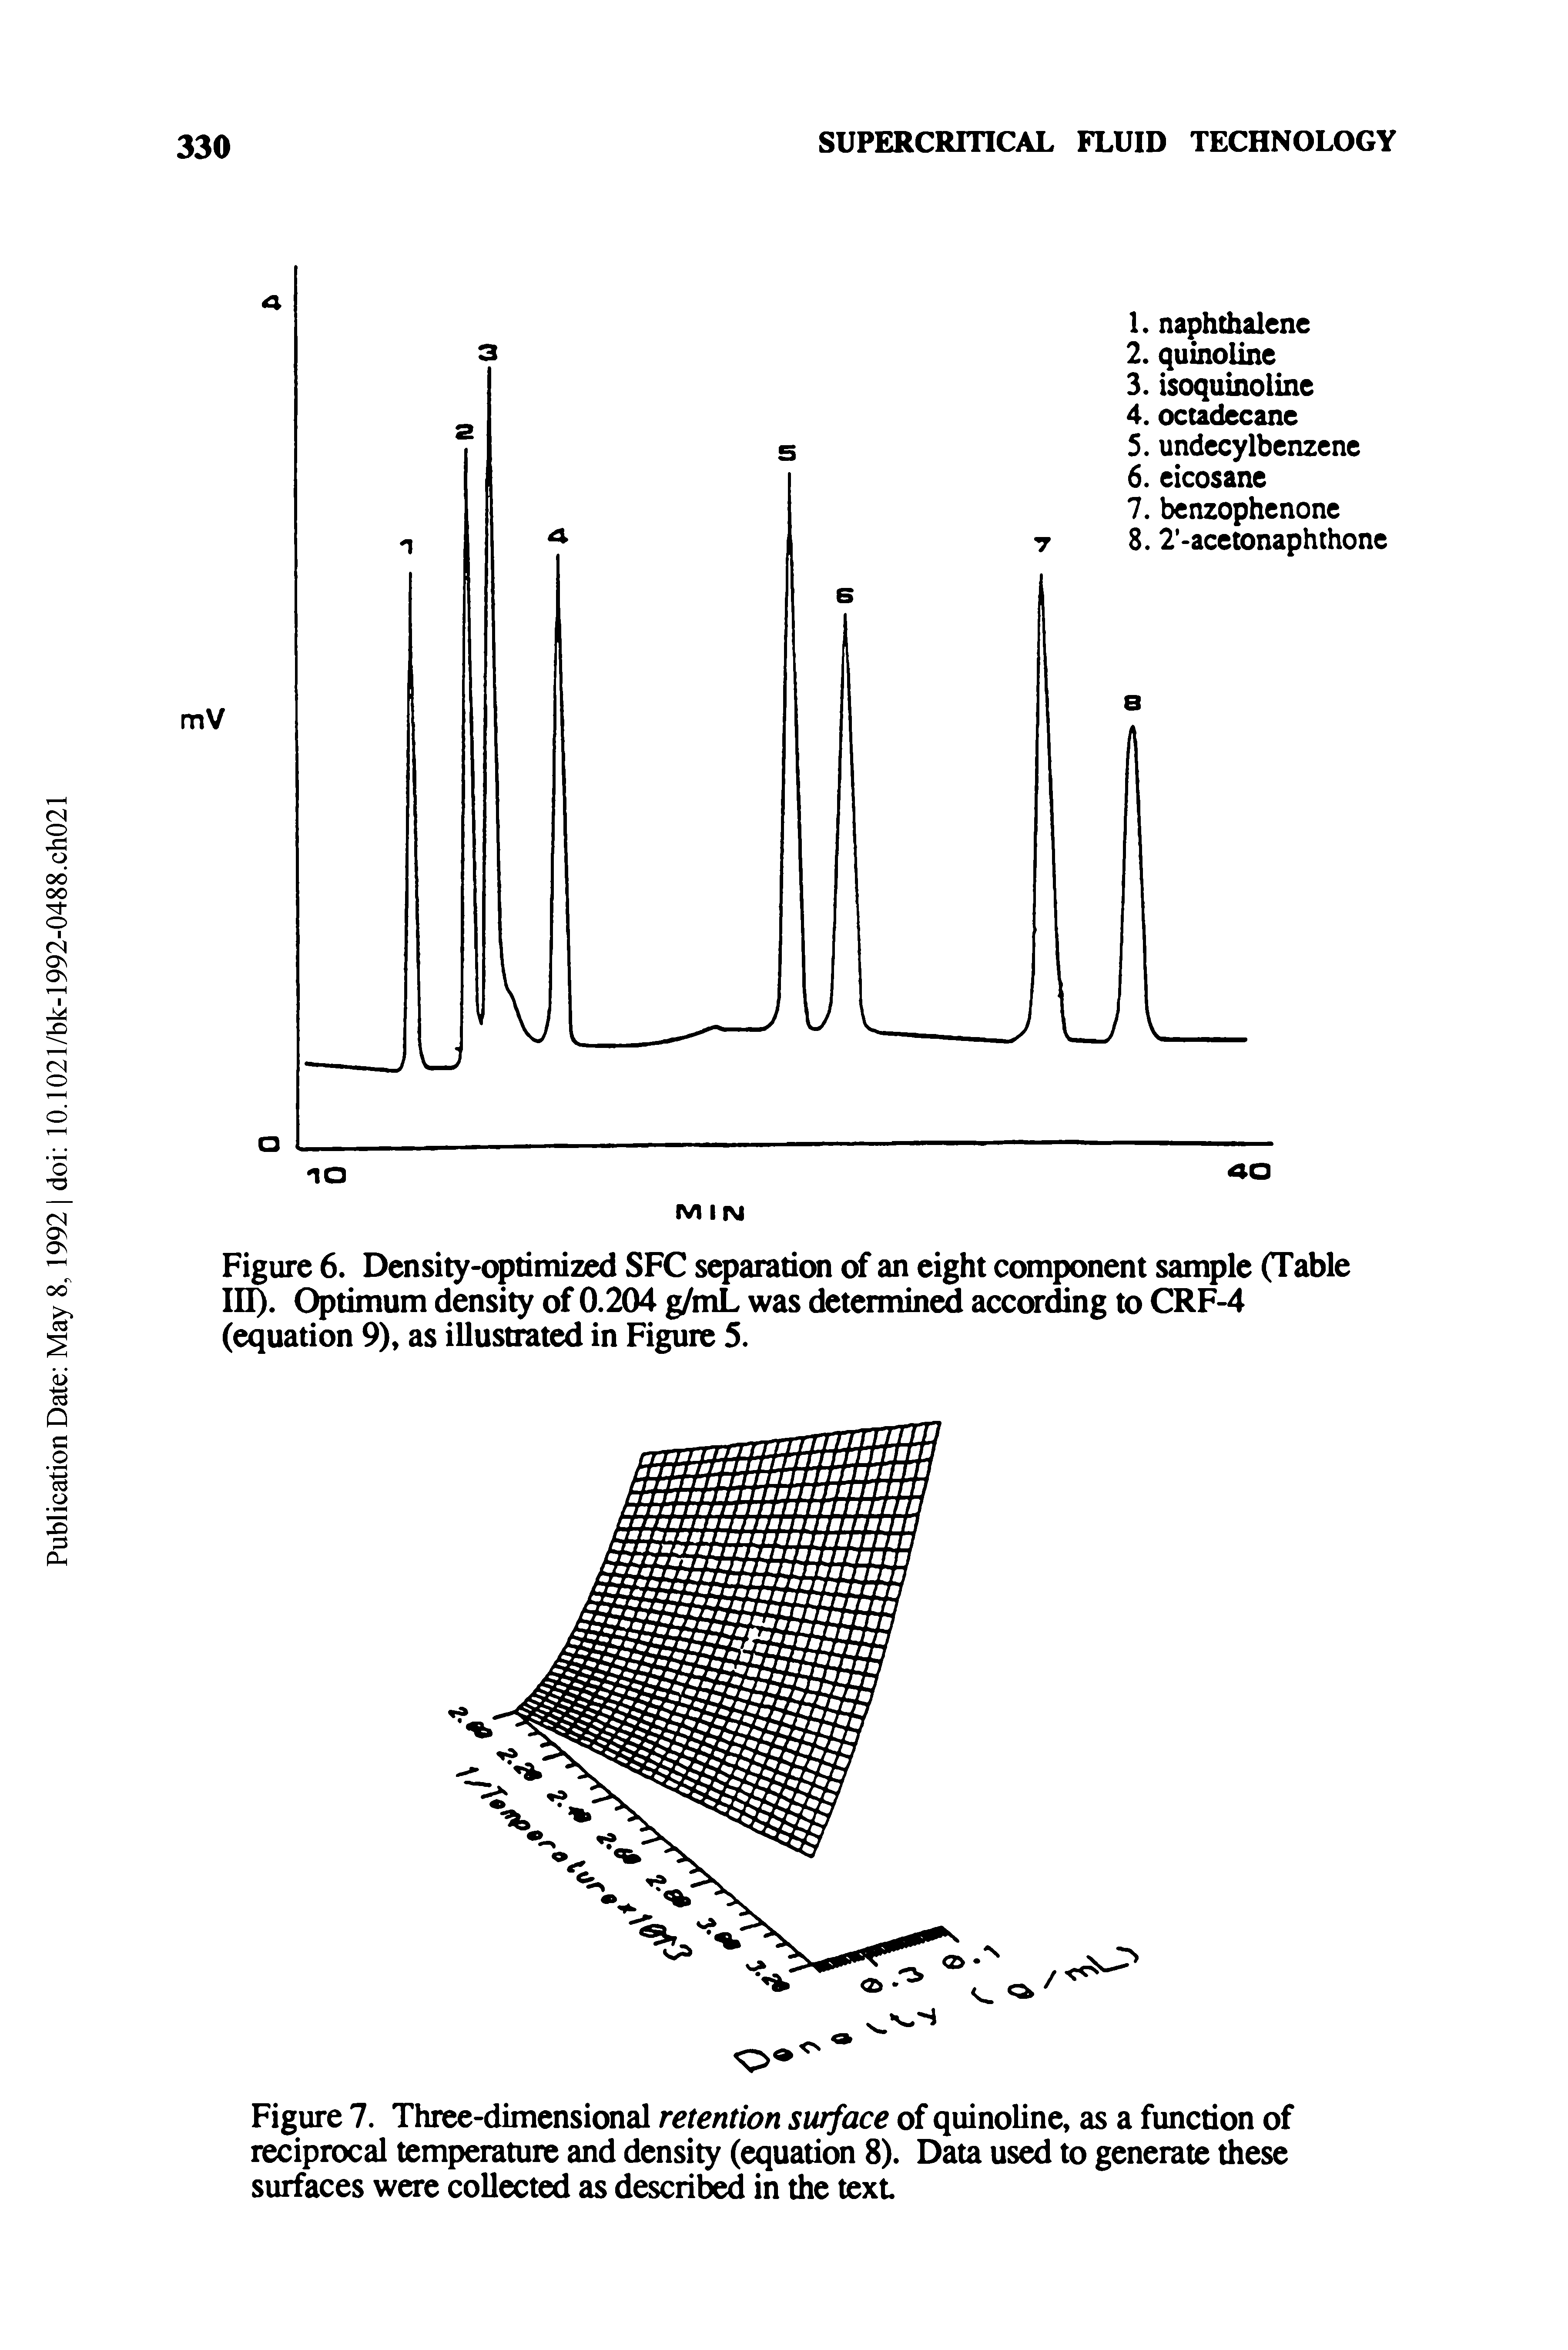 Figure 6. Density-optimized SFC separation of an eight component sample (Table III). Optimum density of 0.204 g/mL was determined according to CRF-4 (equation 9), as illustrated in Figure 5.